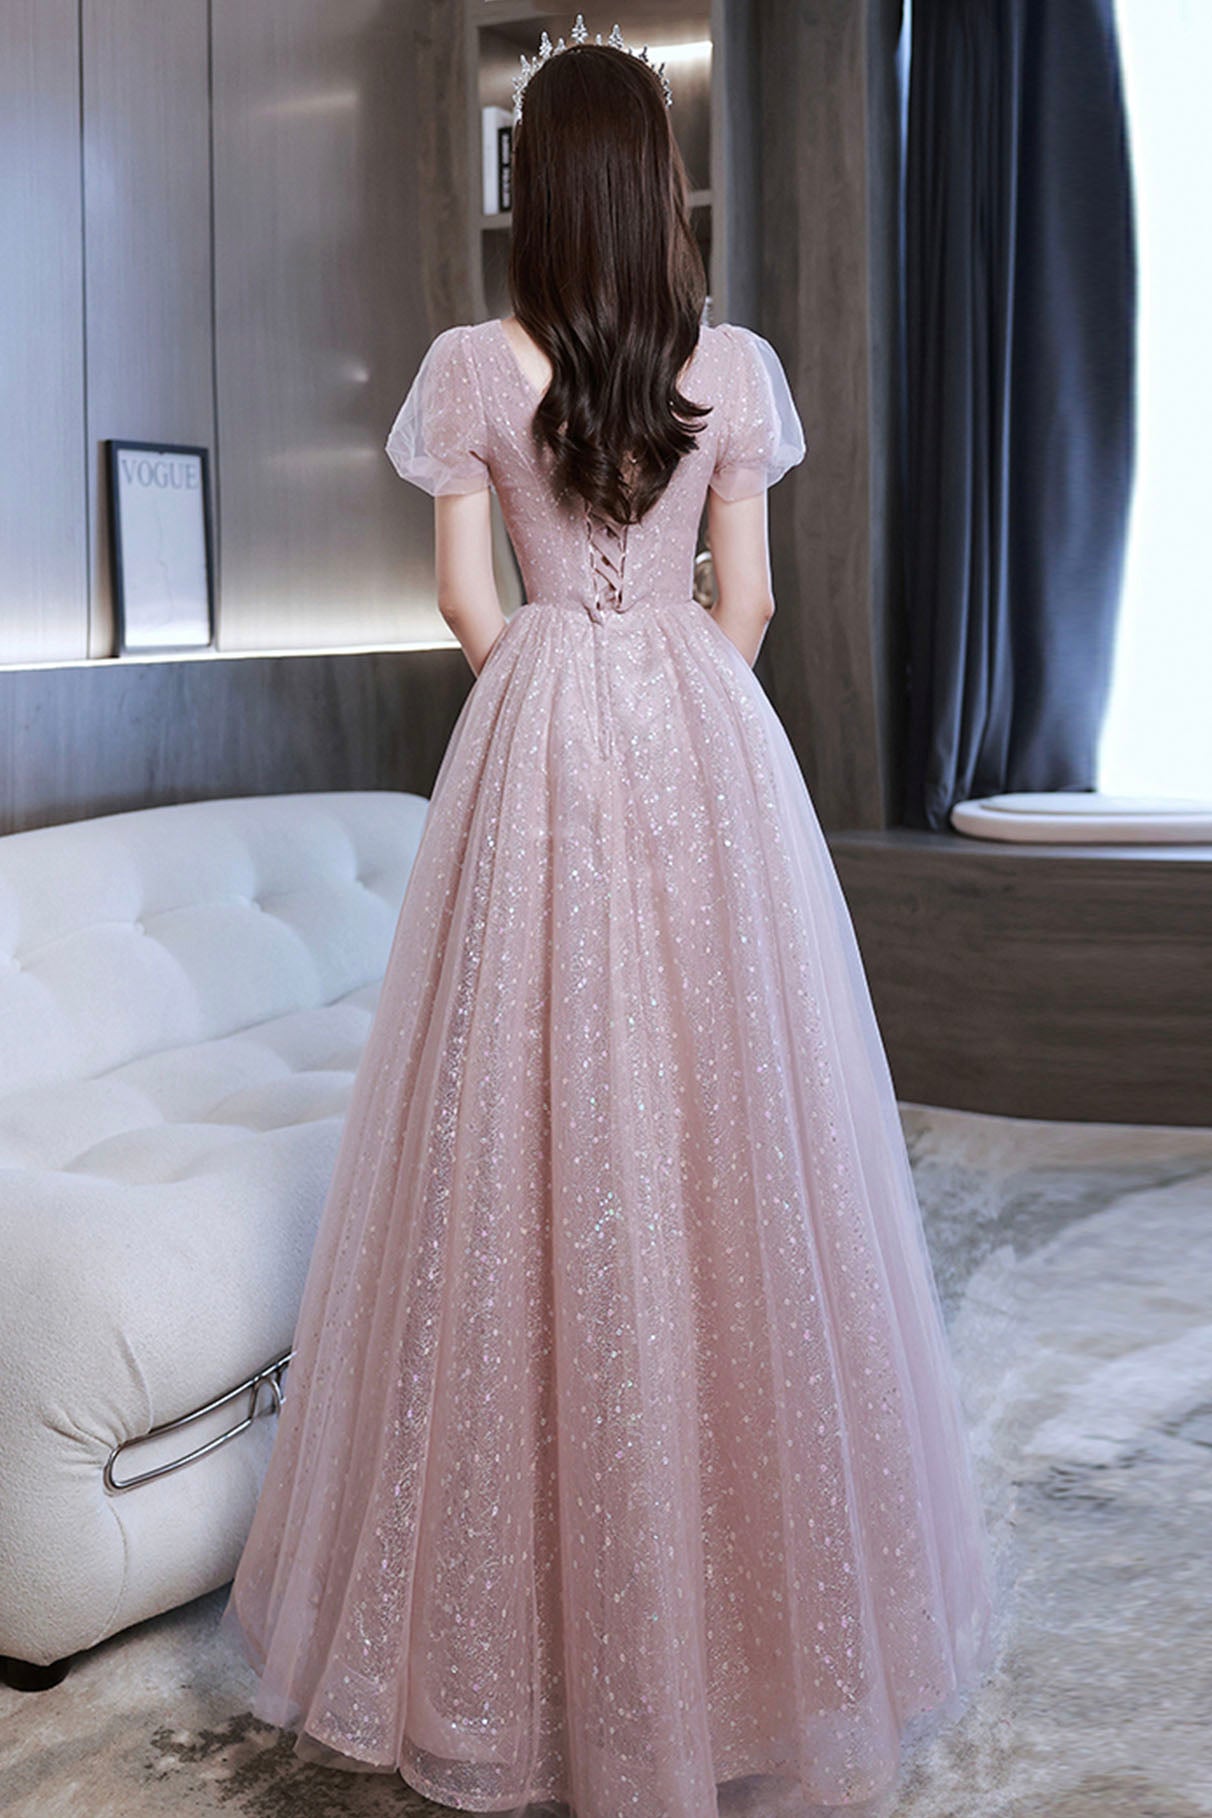 Pink Sequins and Lace Long Formal Dress, Cute Short Sleeve Evening Dress